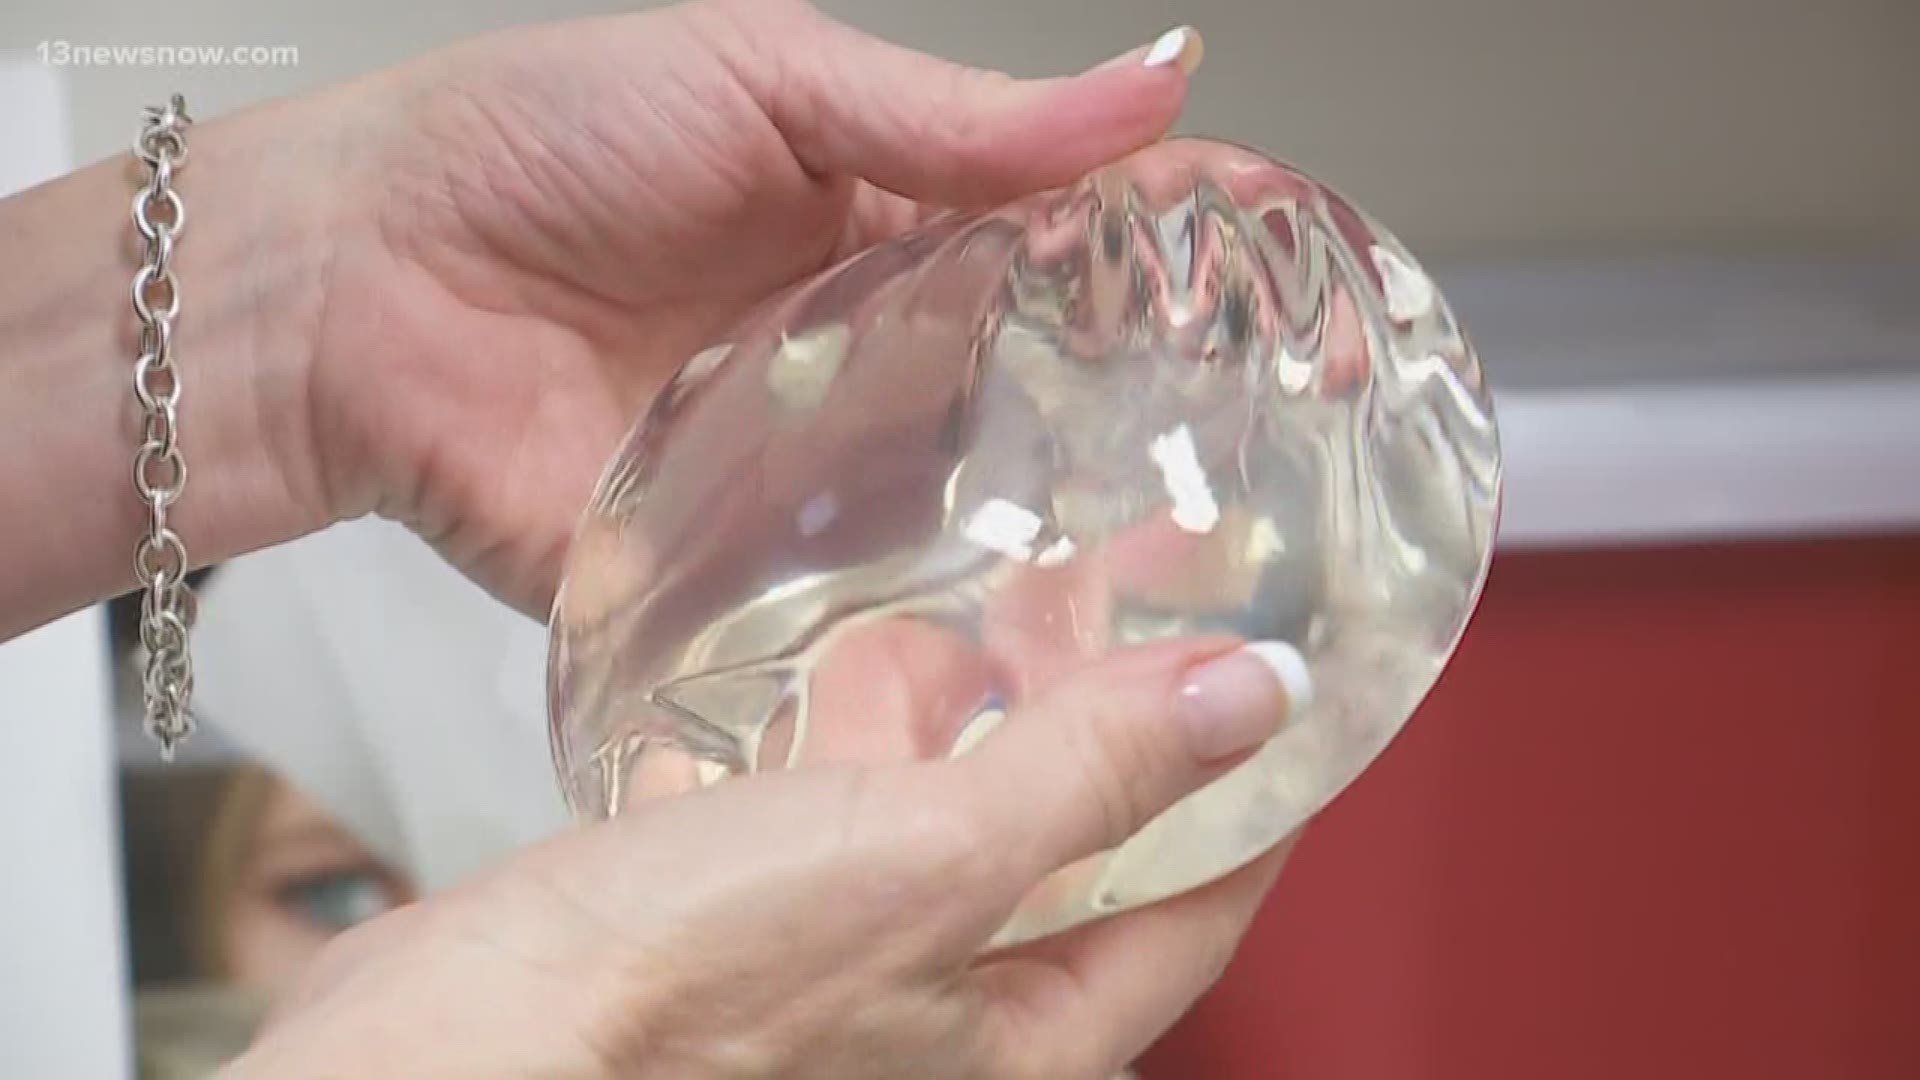 The FDA shows textured implants have a small risk of developing breast implant-associated anaplastic large cell lymphoma which is also known as BIA-ALCL.